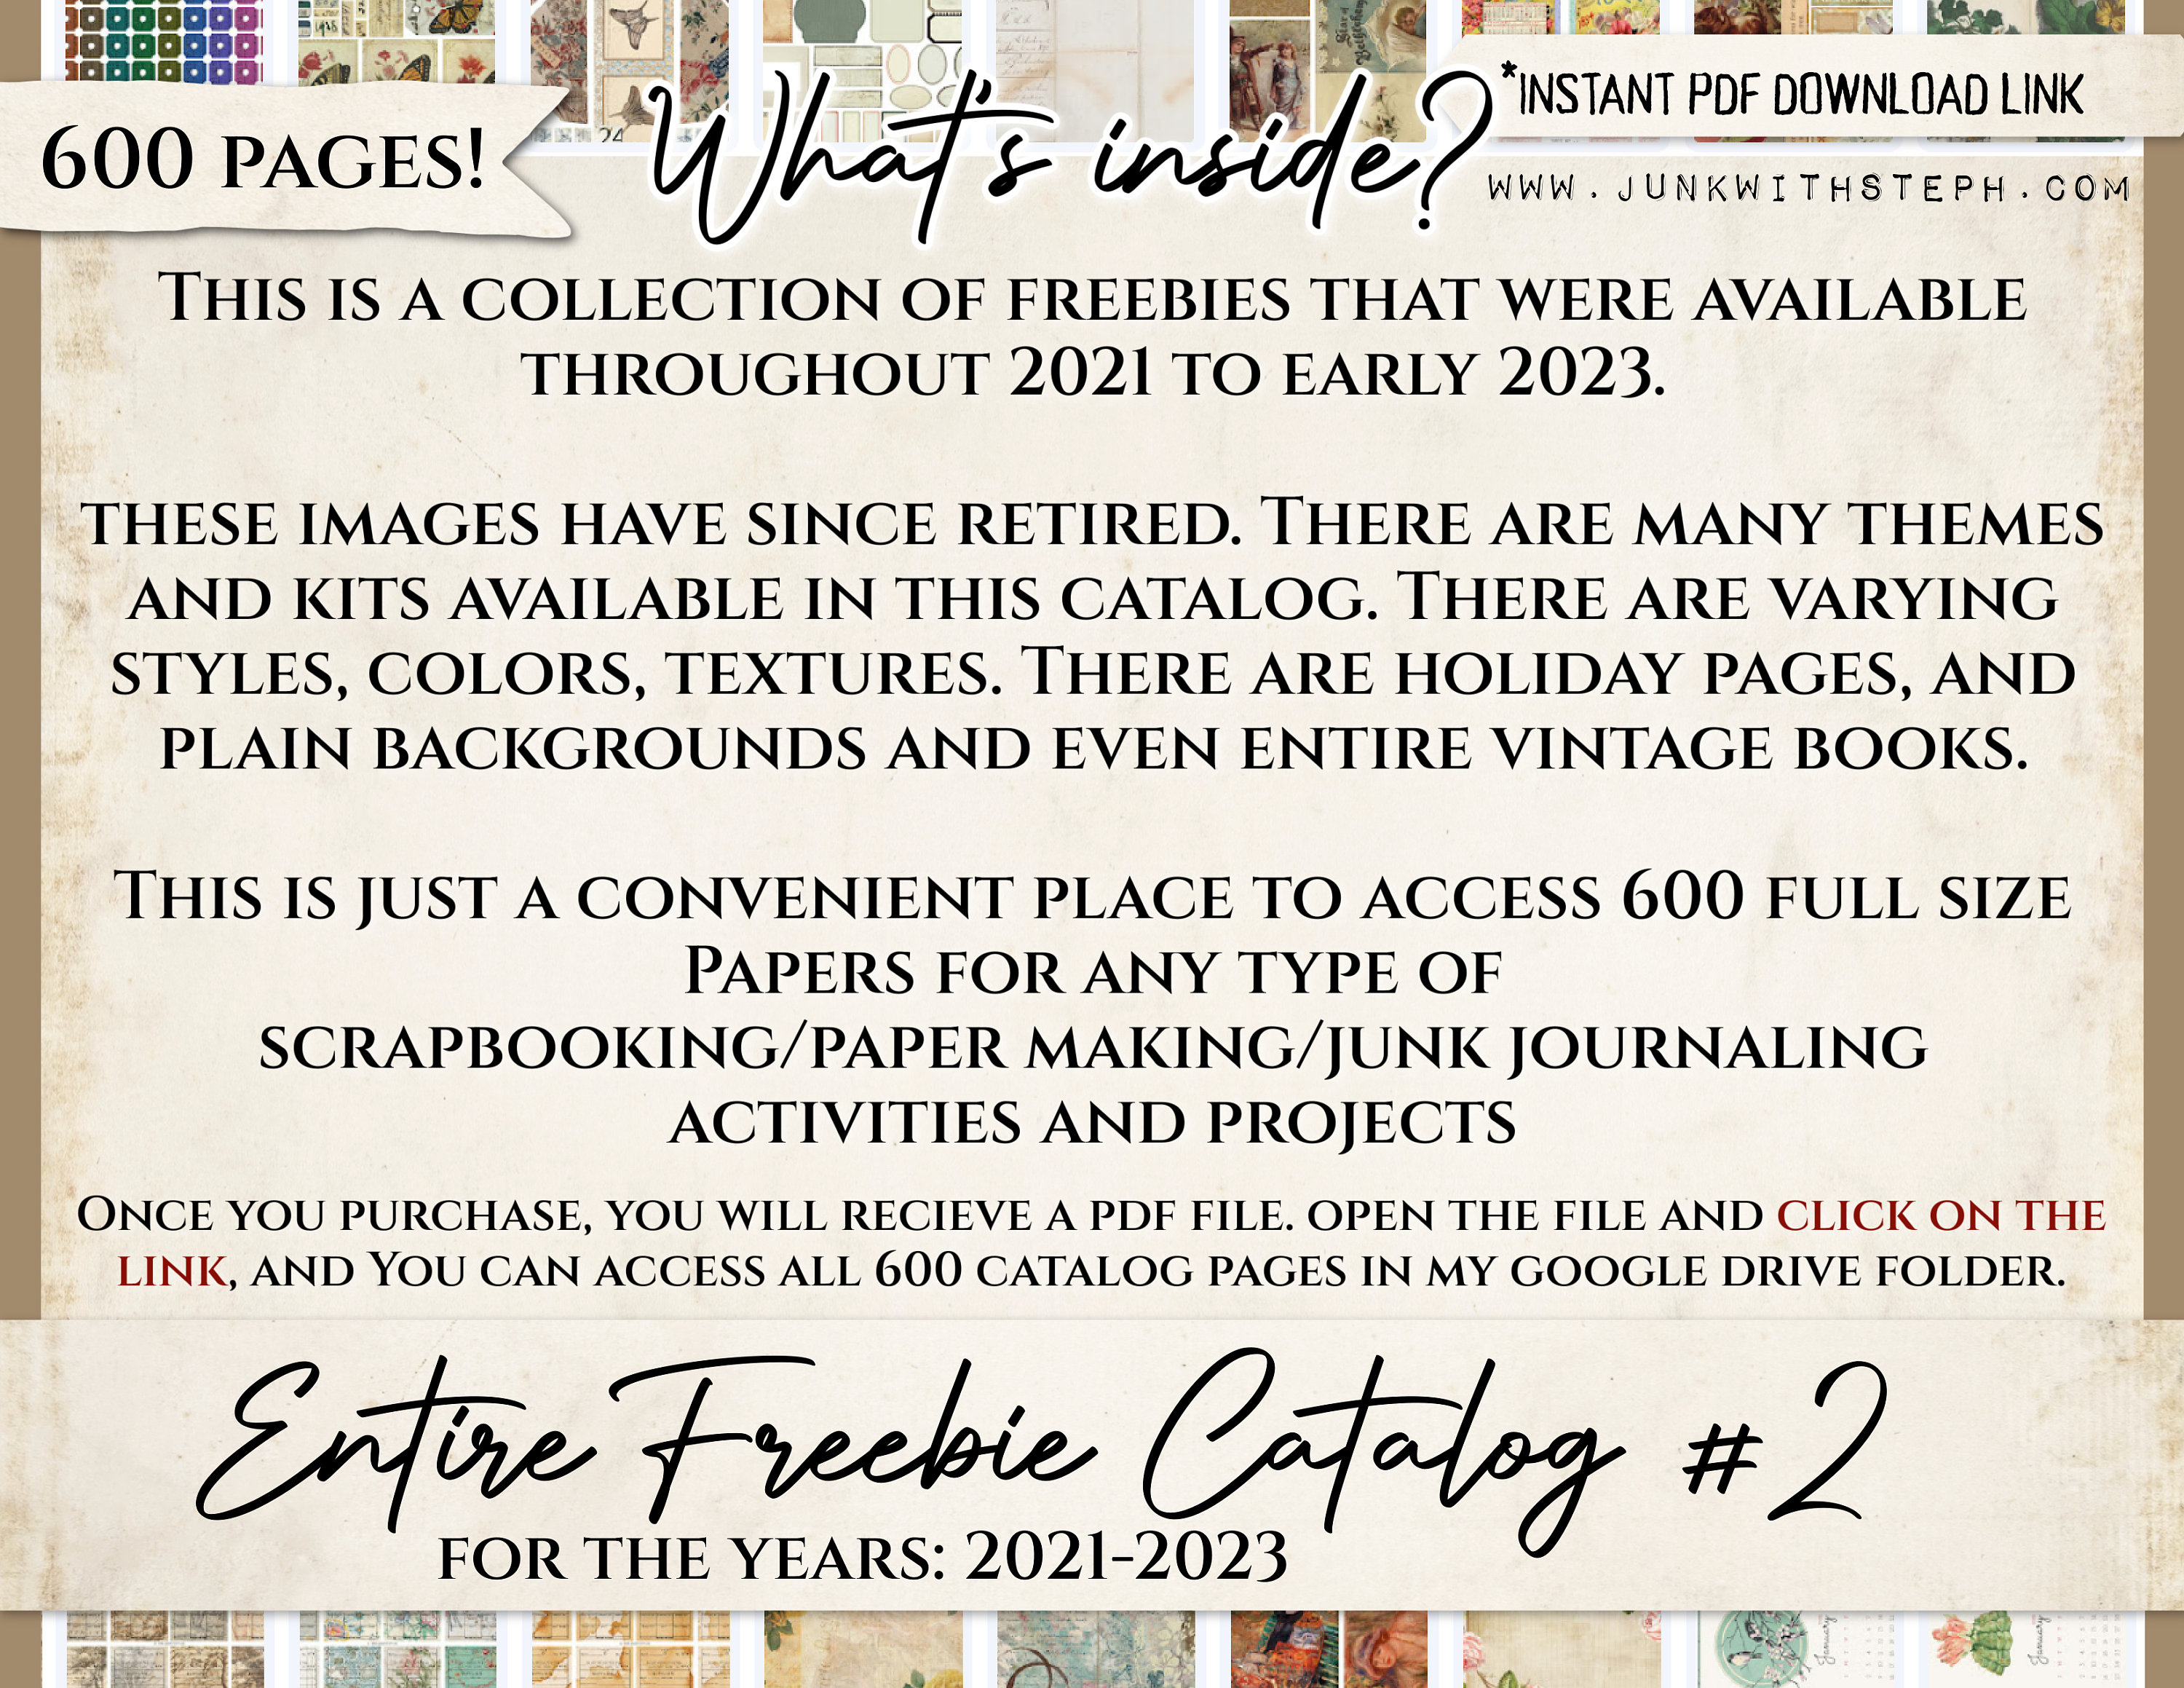 Catalogs with freebies